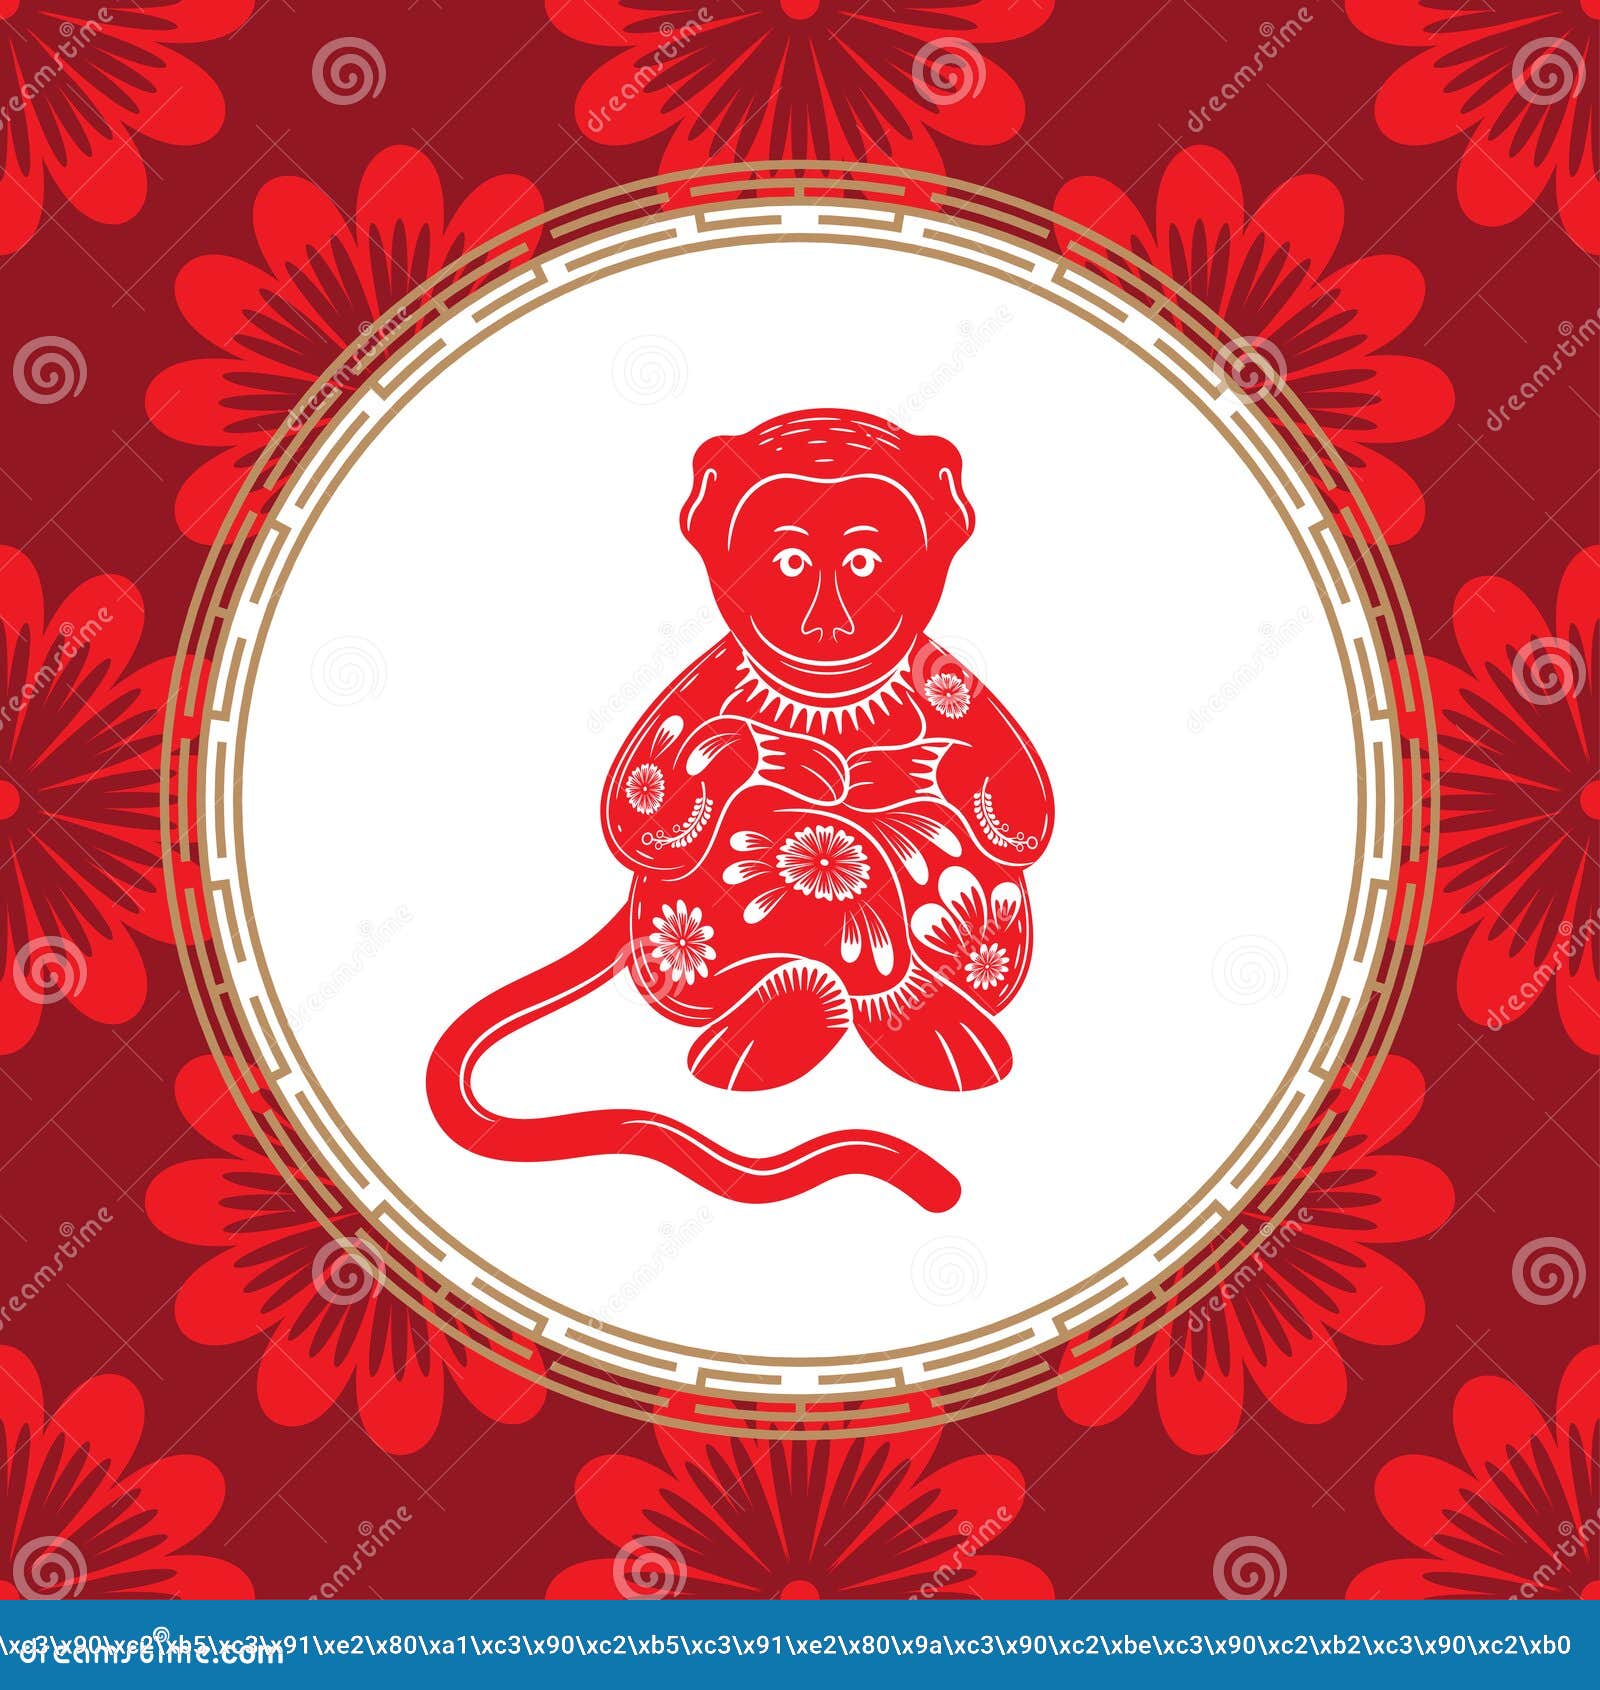 Chinese Zodiac Sign of the Year of the Monkey. Red Monkey with White